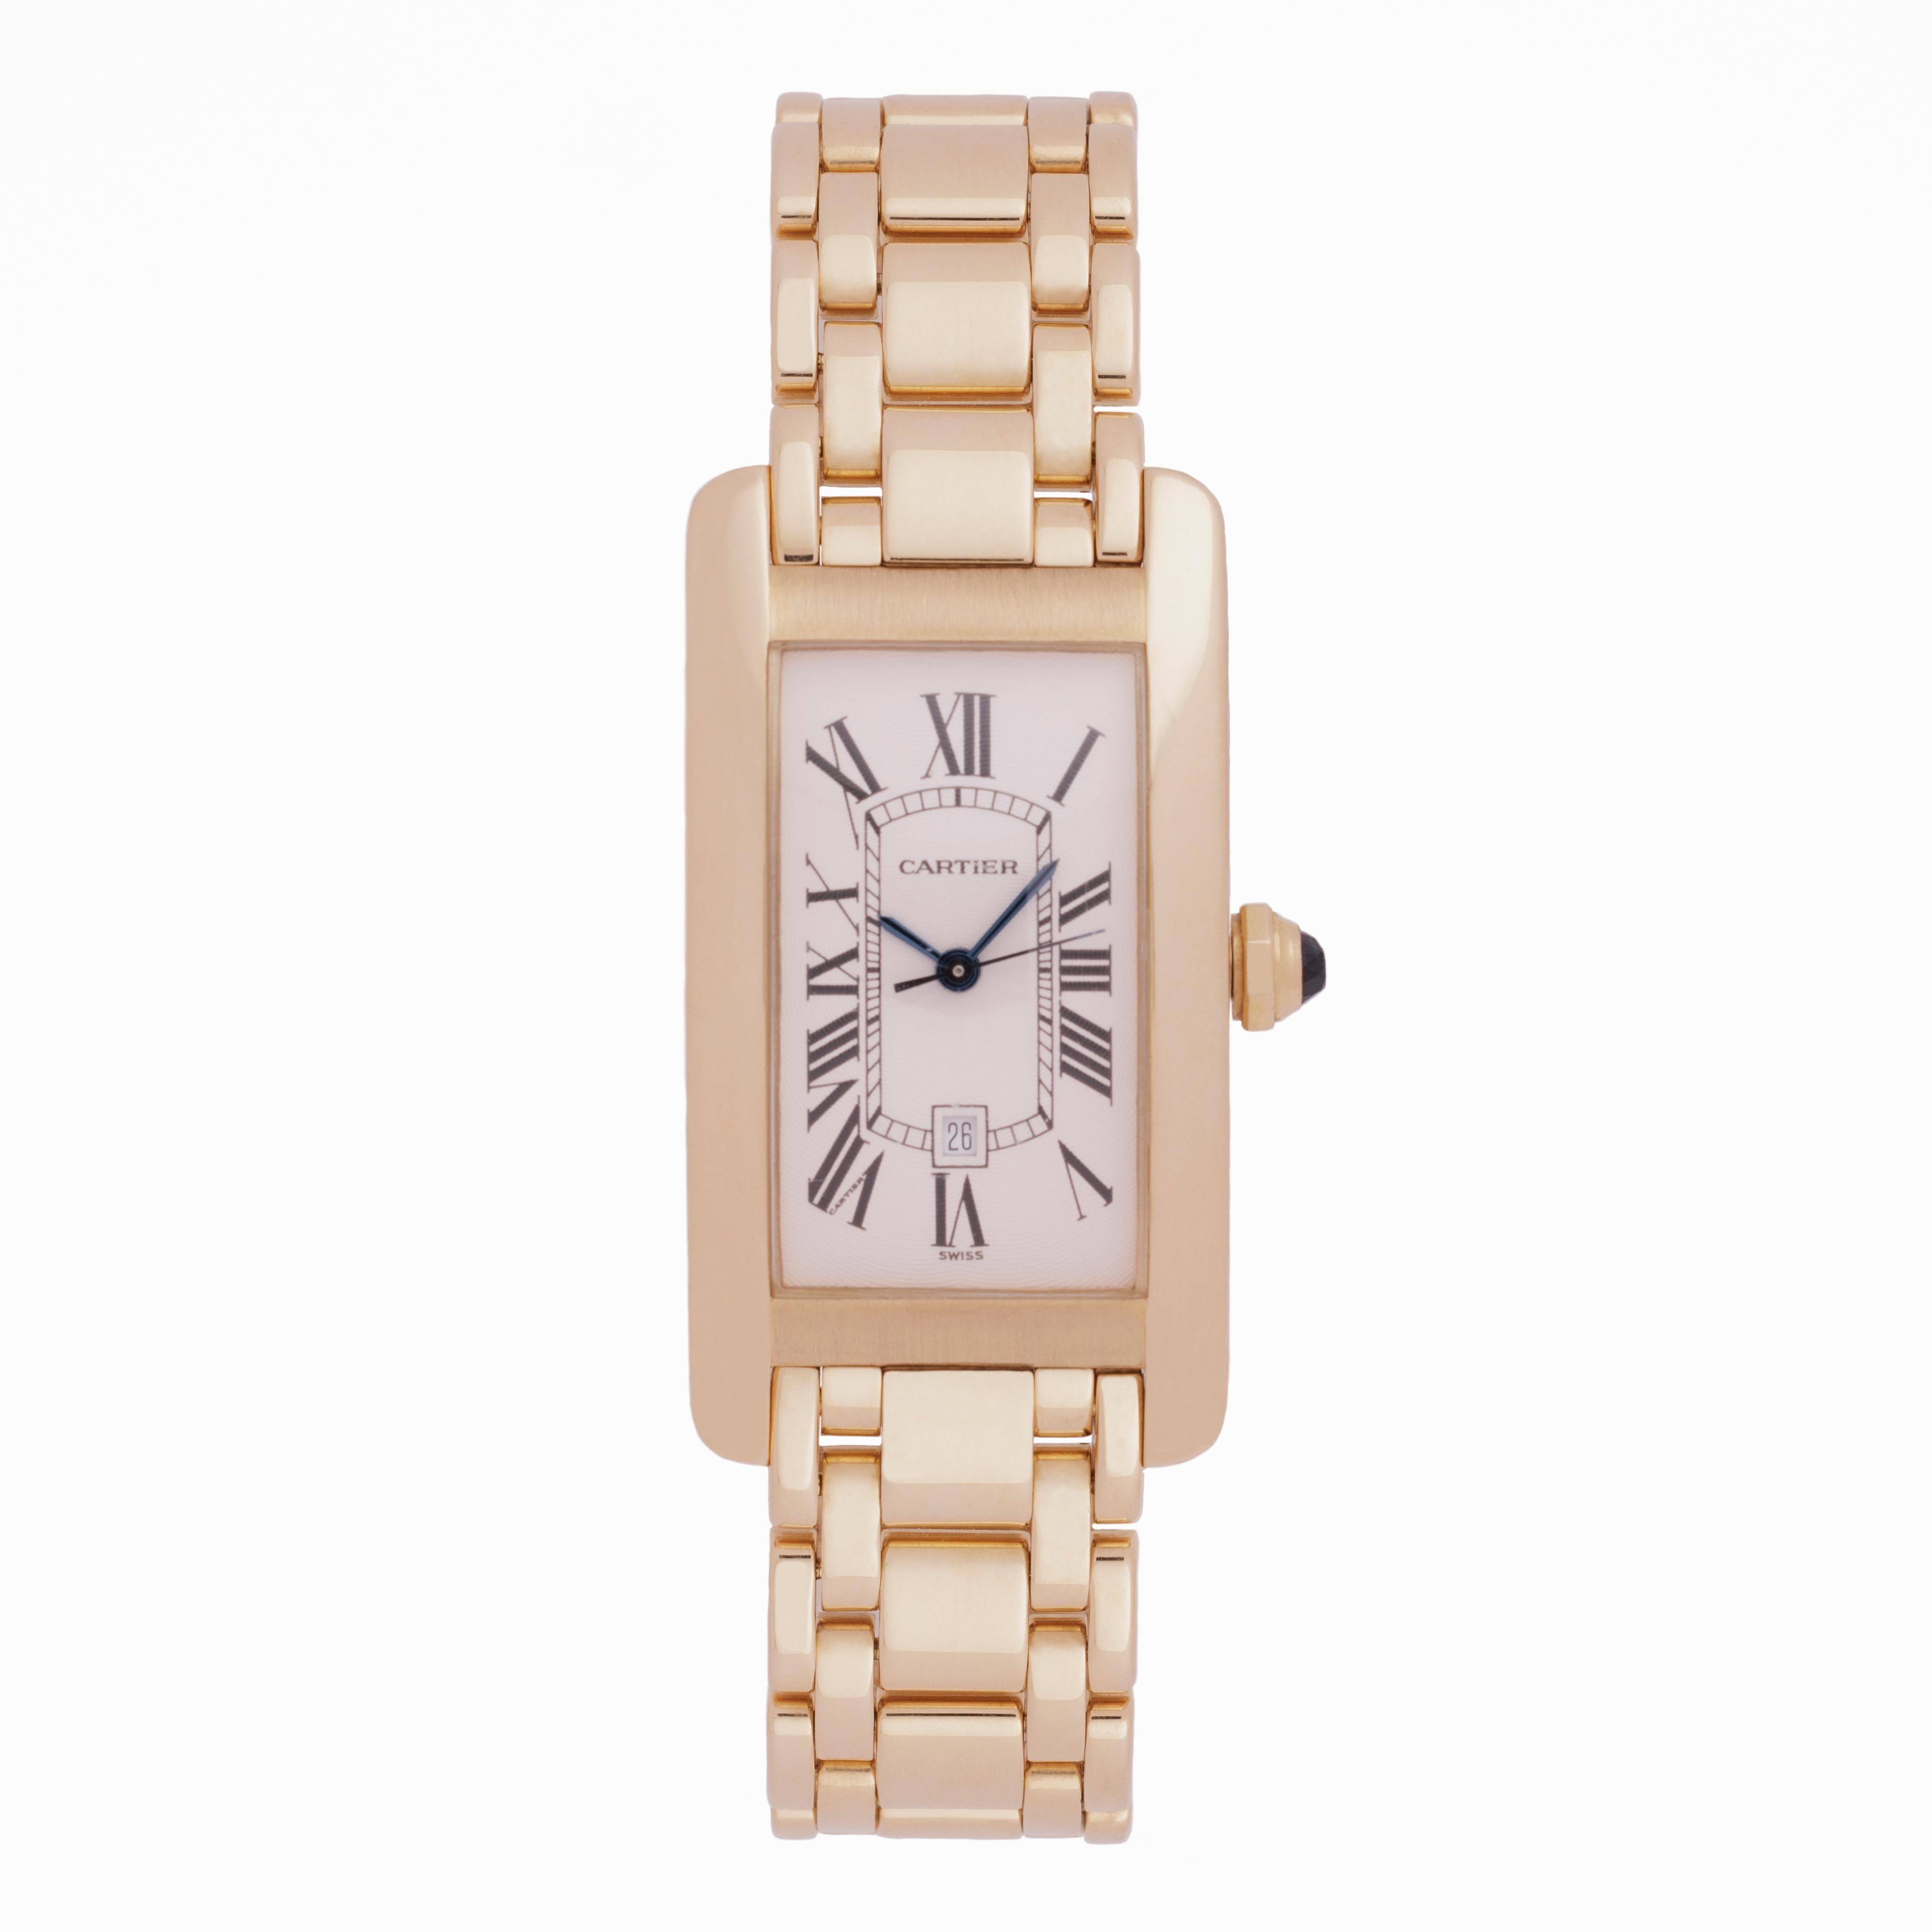 Cartier Tank Américaine with Date 
Model W26035K2
18 Karat Yellow Gold
Automatic Movement
c.2000
Fits up to a size 6